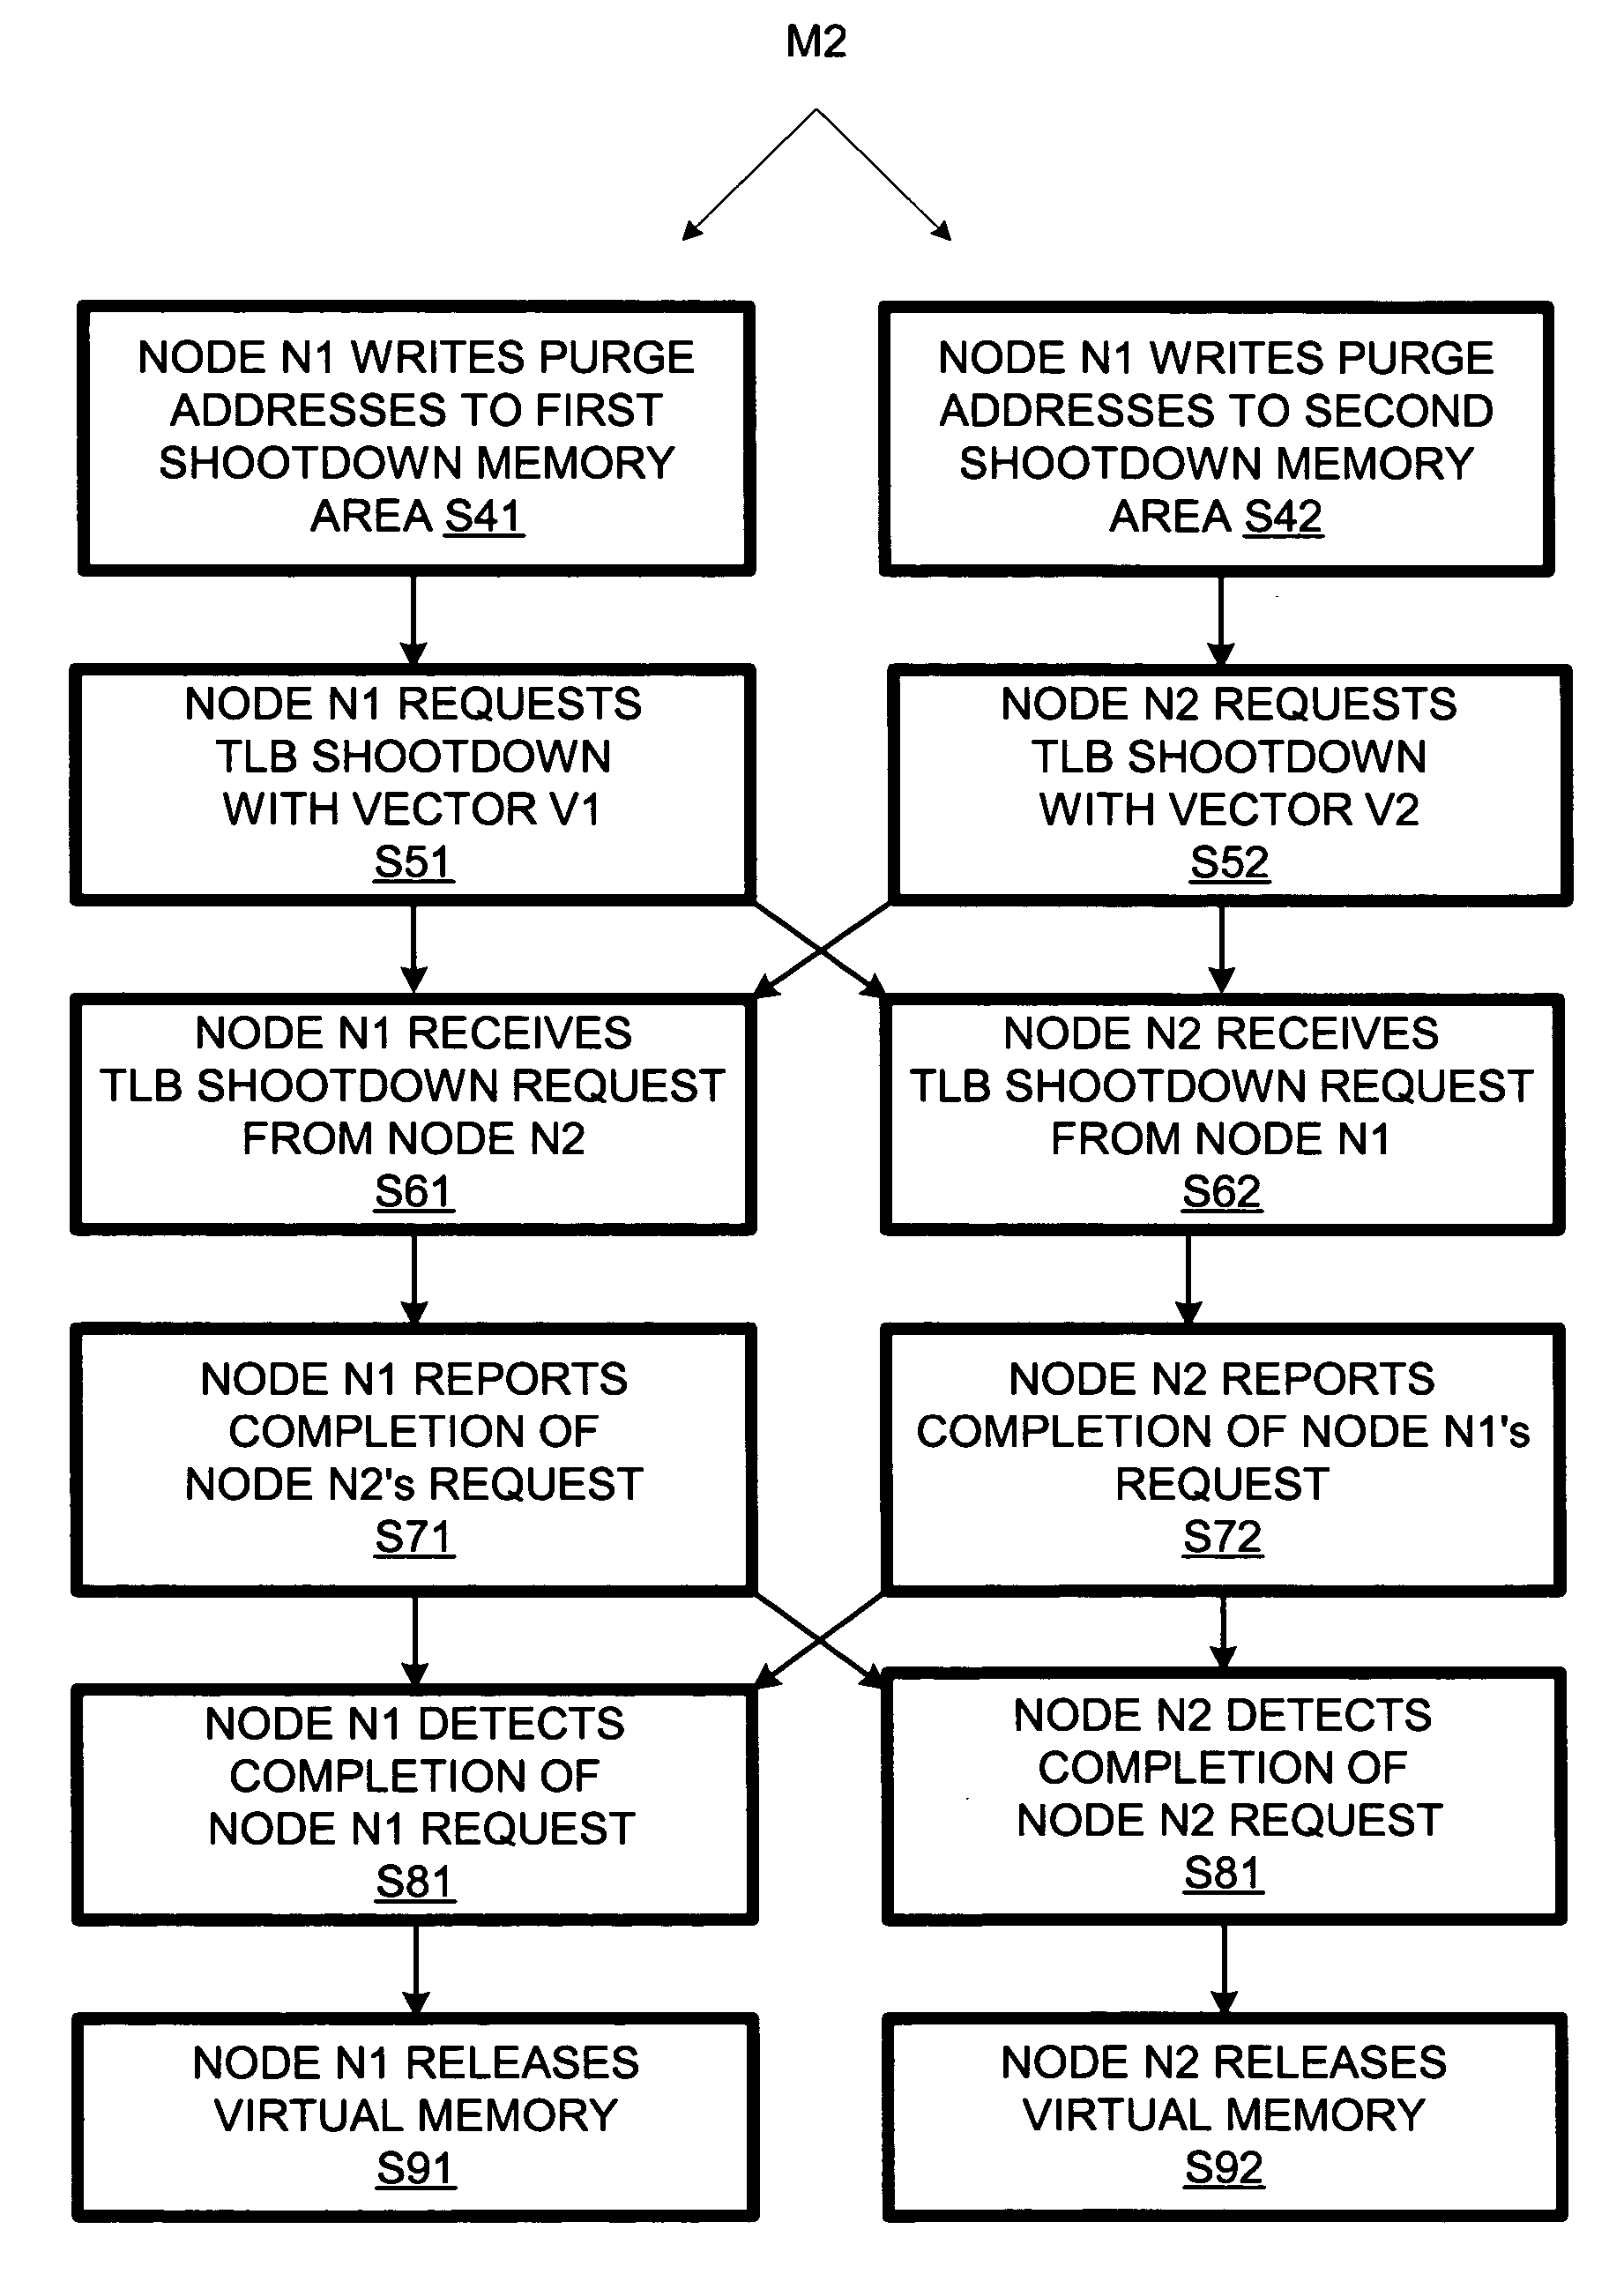 Multiprocessor system having plural memory locations for respectively storing TLB-shootdown data for plural processor nodes